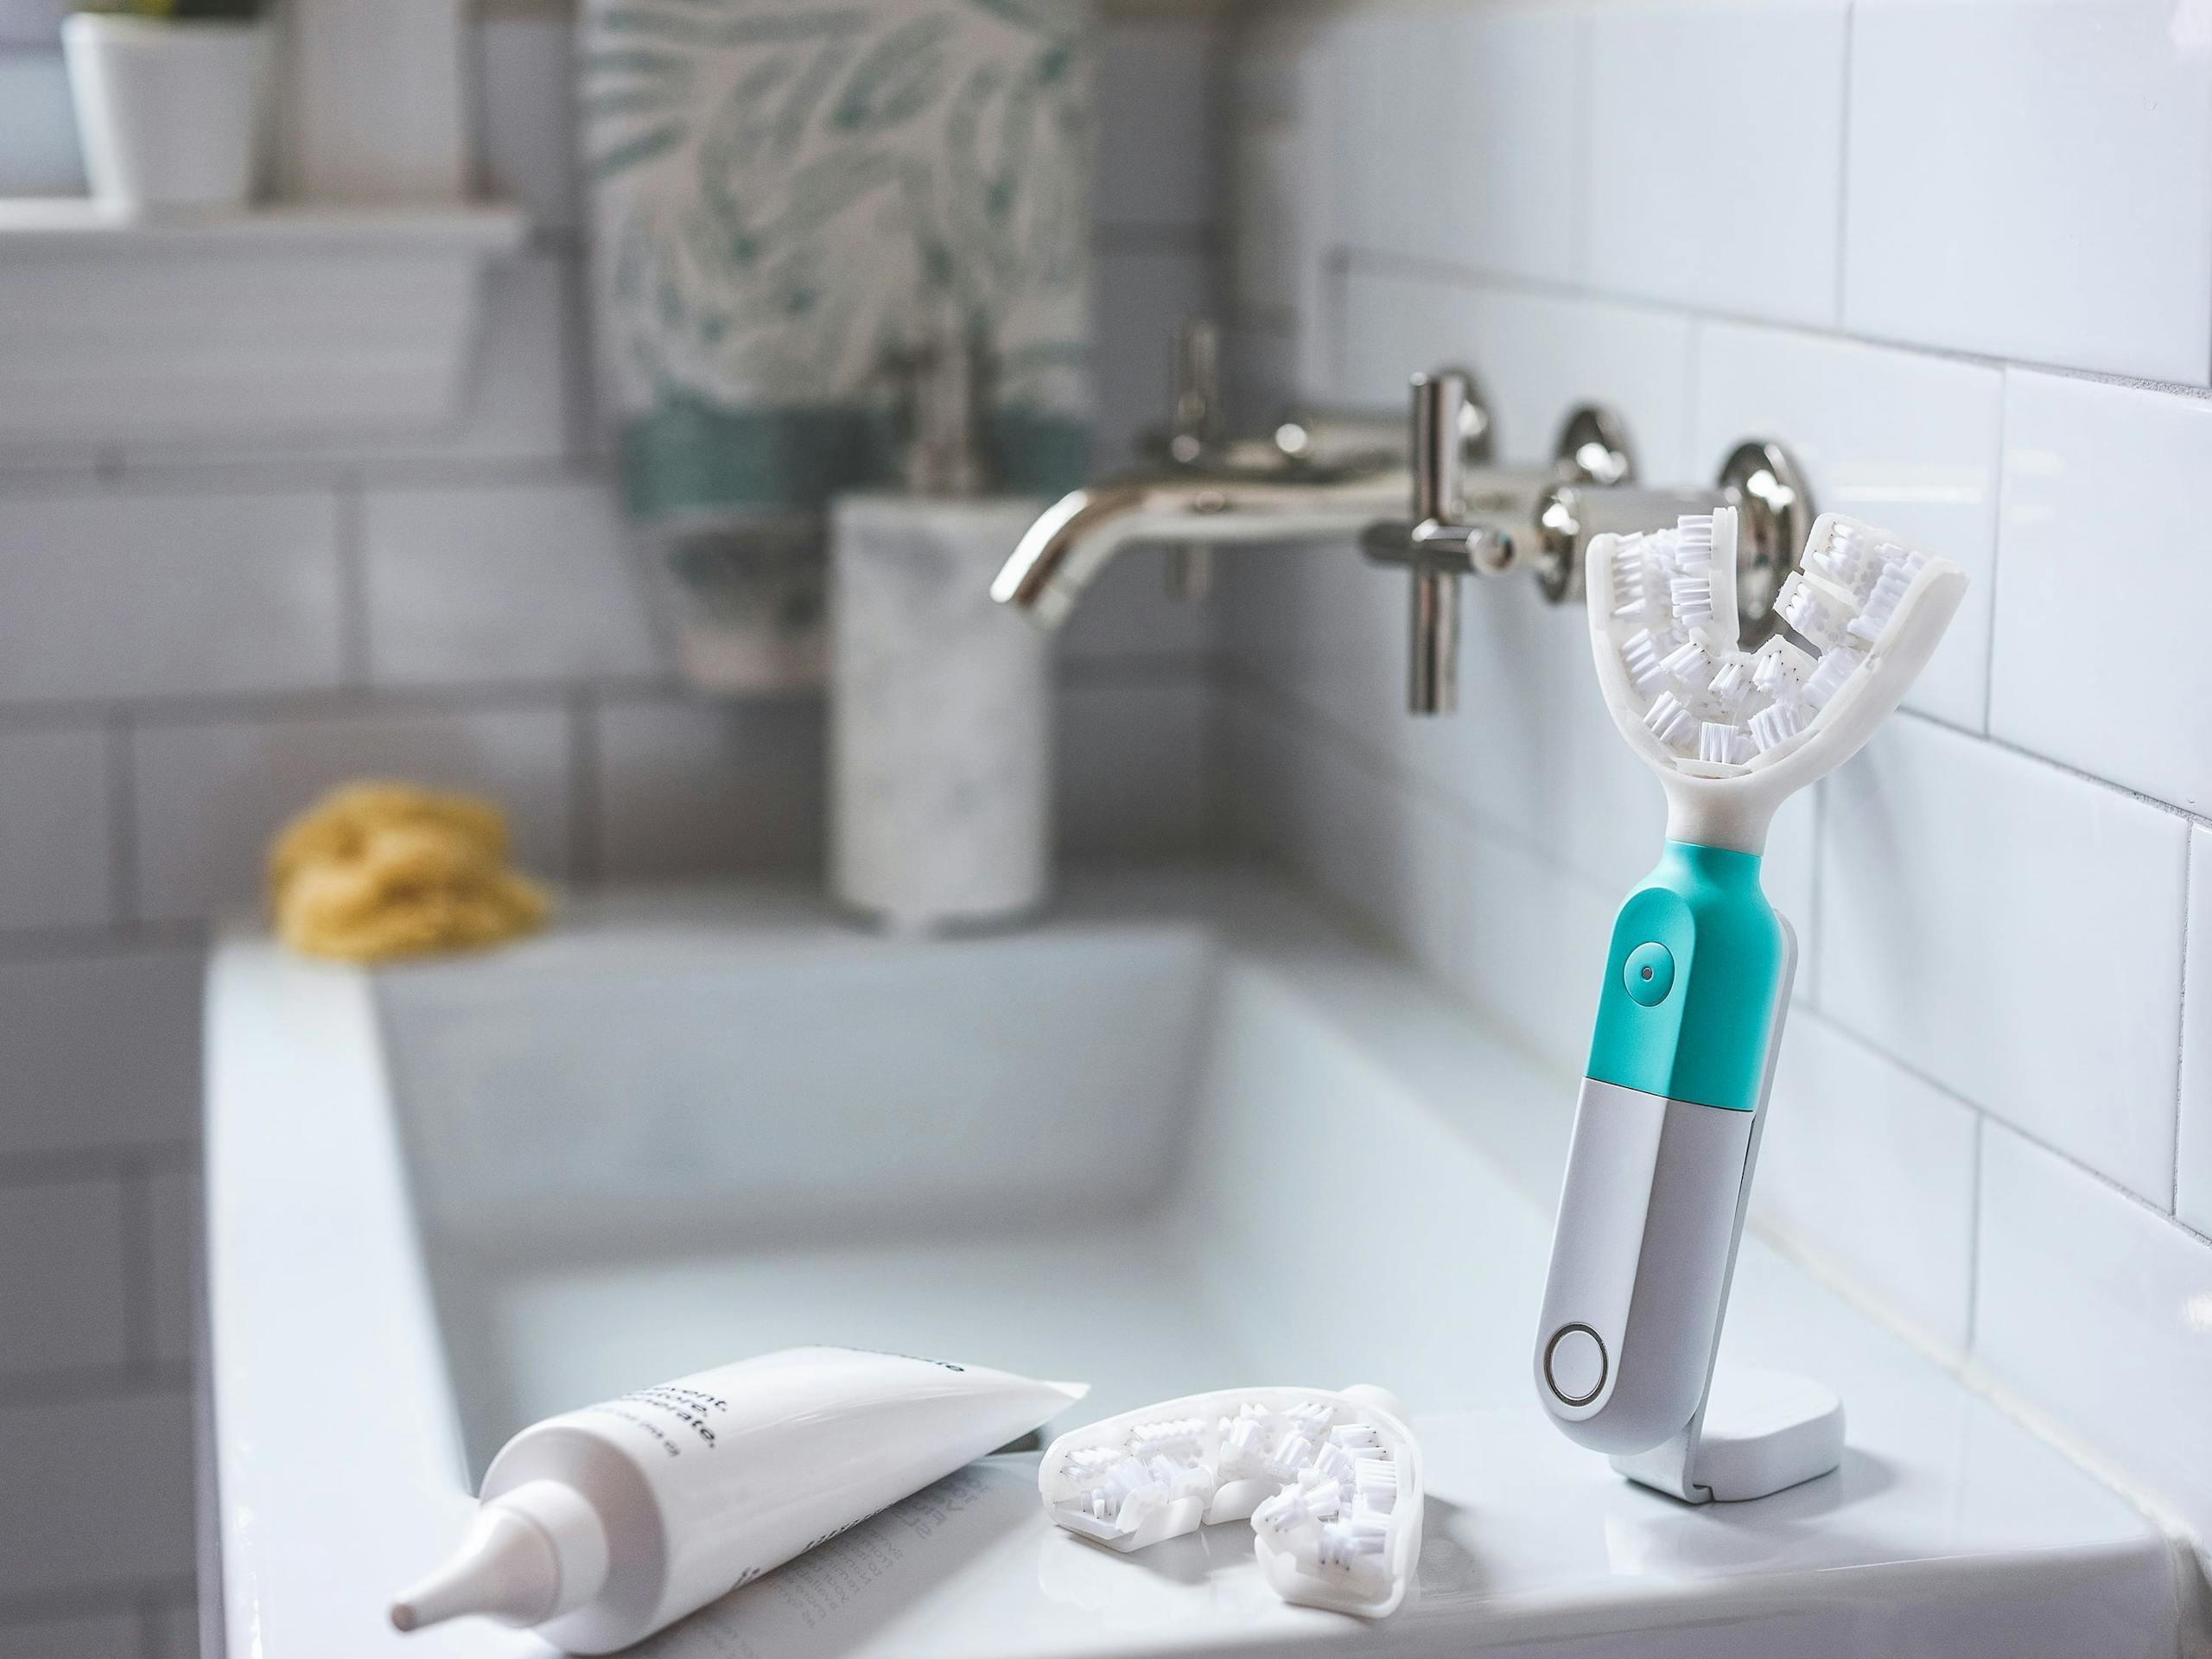 Meet Sympl, the toothbrush that’s way more effective at removing plaque than traditional brushing.